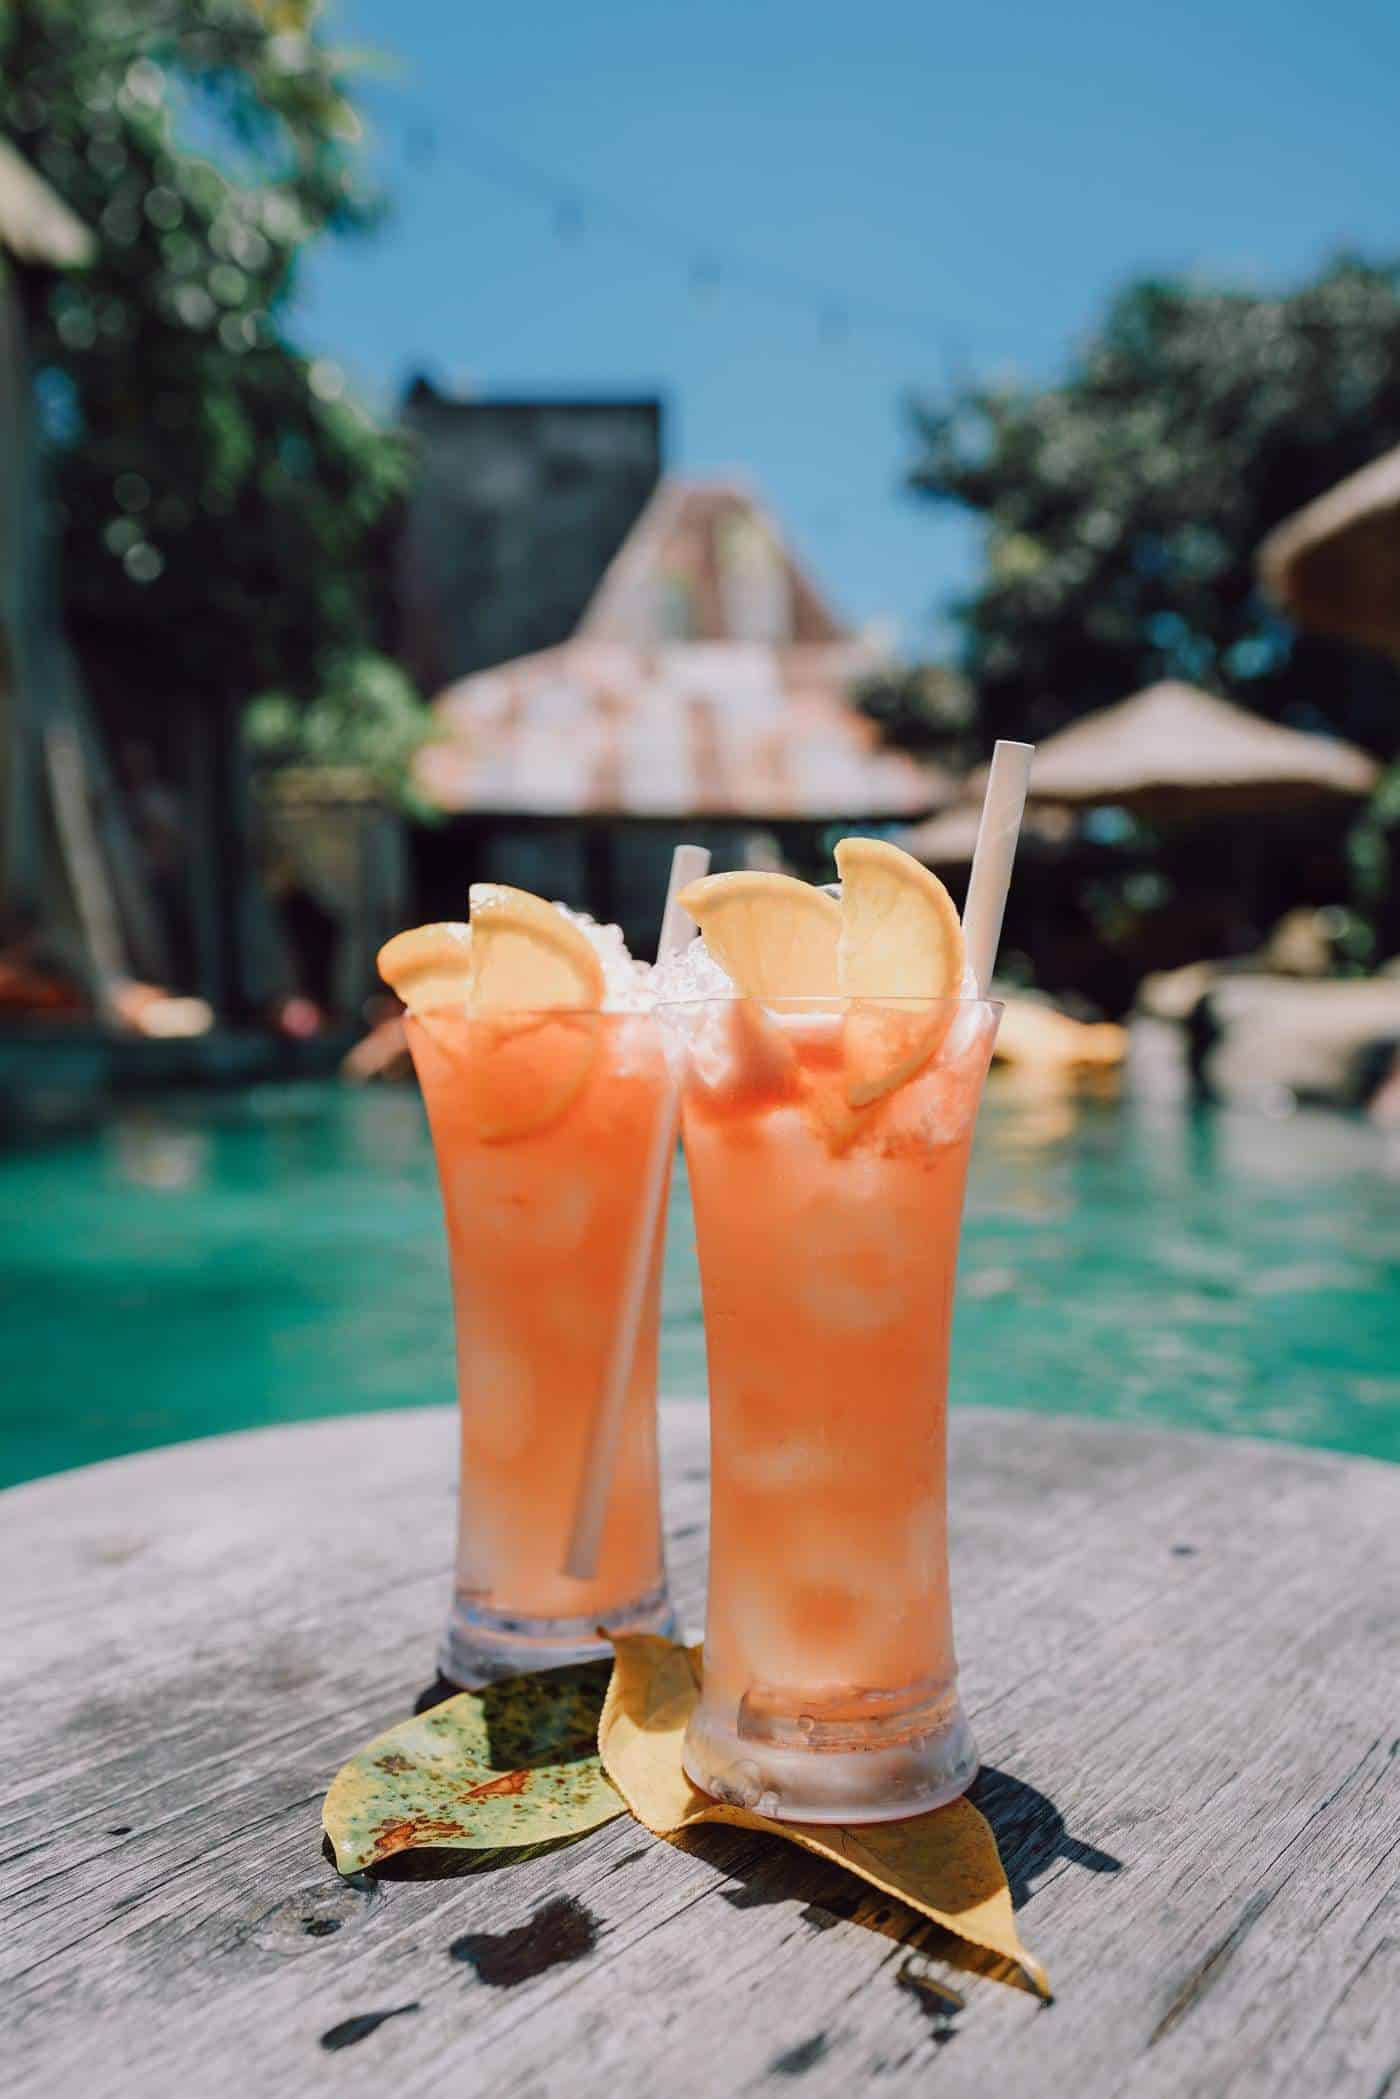 Looking for the best Bali beach clubs? We have you covered! Today, we're giving an honest review of 5 of Bali most notable beach clubs across the island. Including Folk Beach Club in Ubud